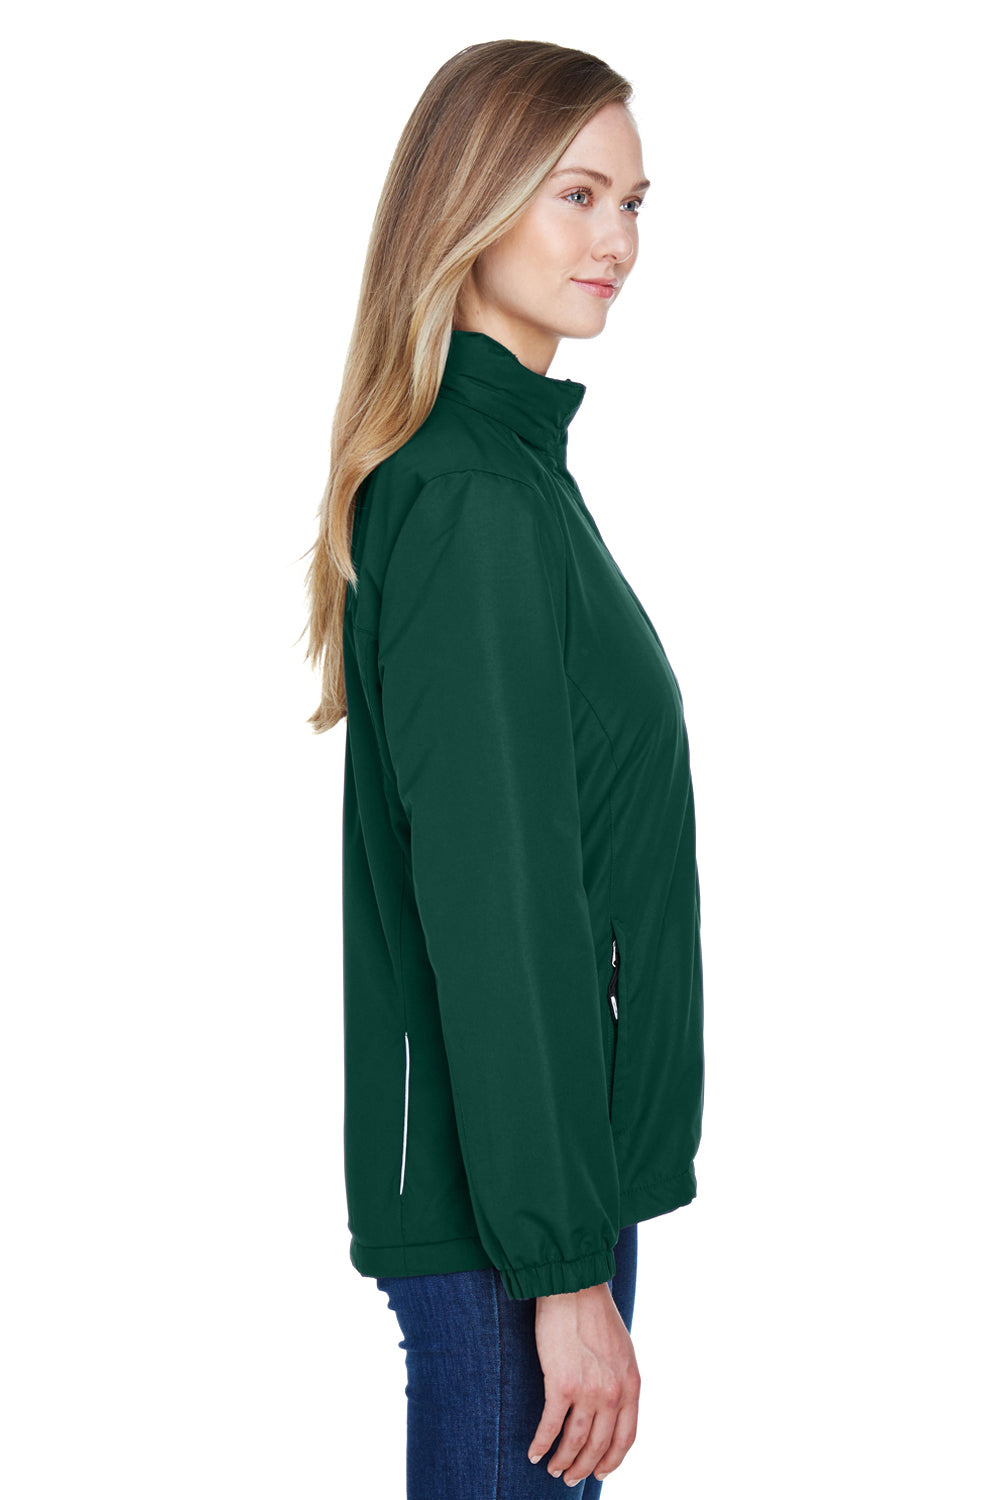 Core 365 78224 Womens Profile Water Resistant Full Zip Hooded Jacket Forest Green Side